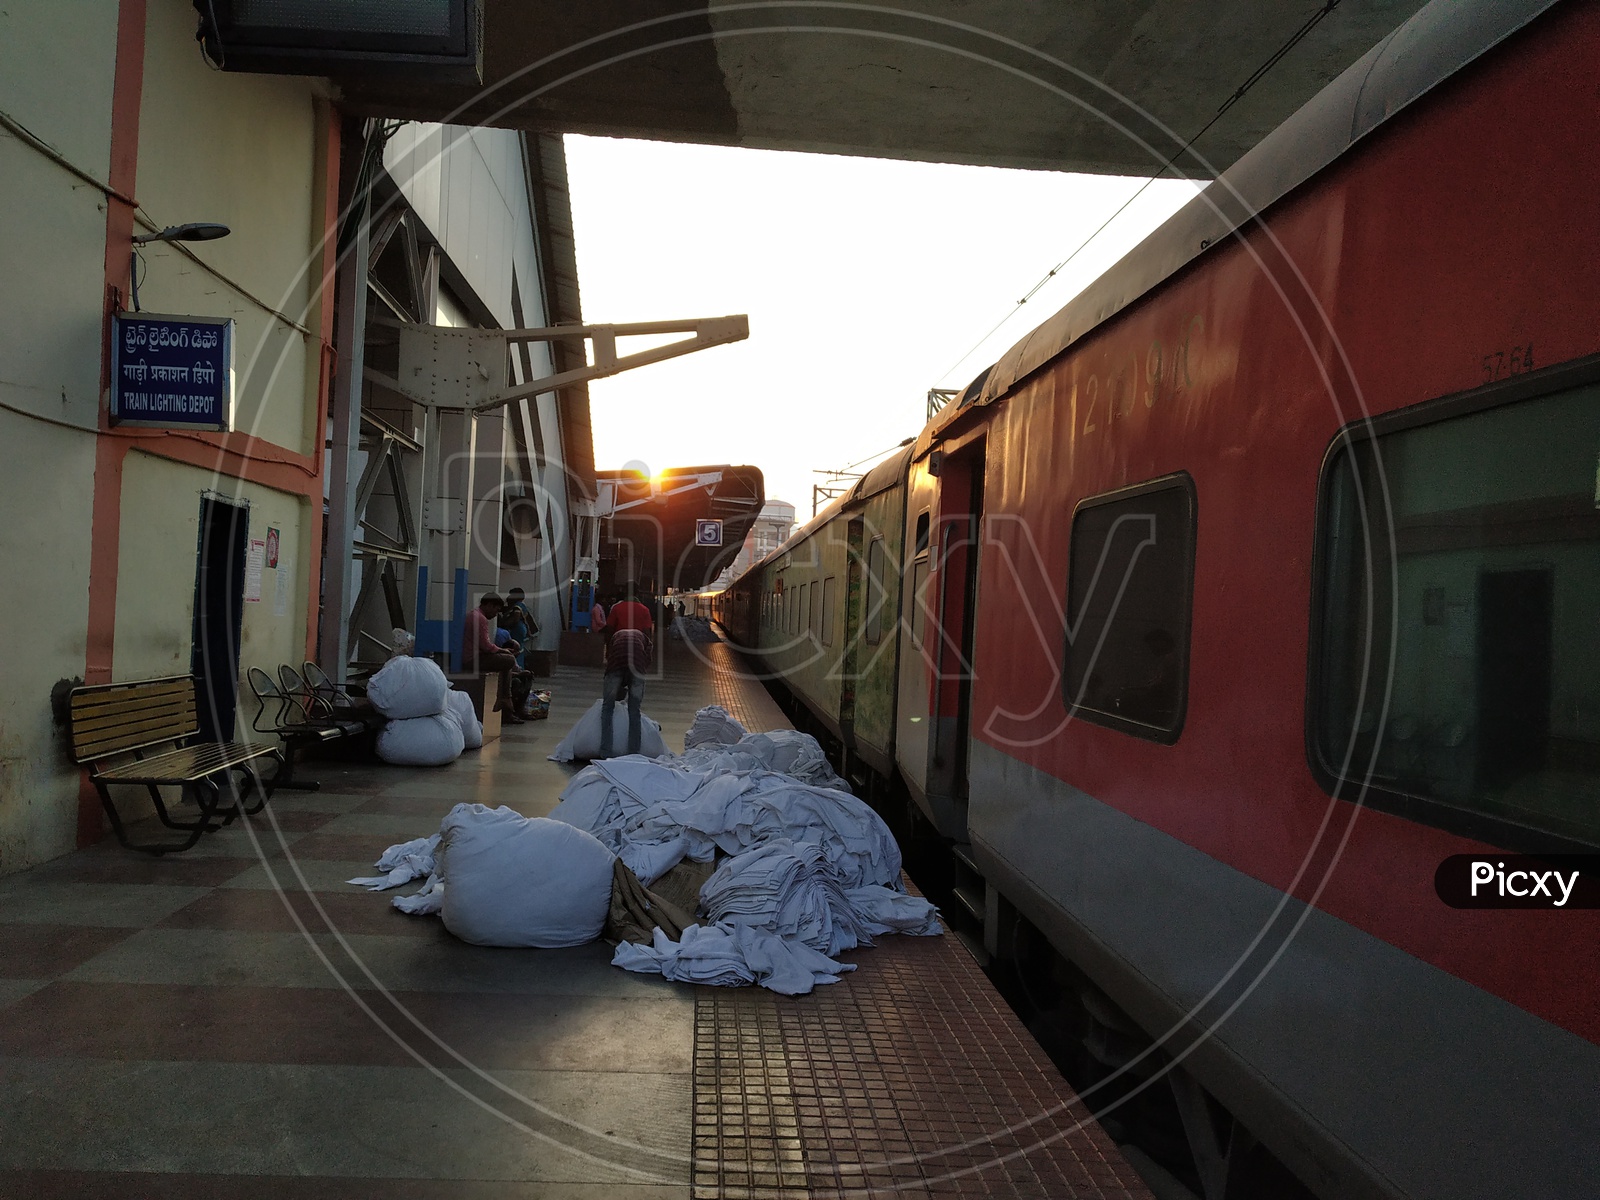 Hospitality Services In Indian Railways Collecting the Bed Sheets From Train